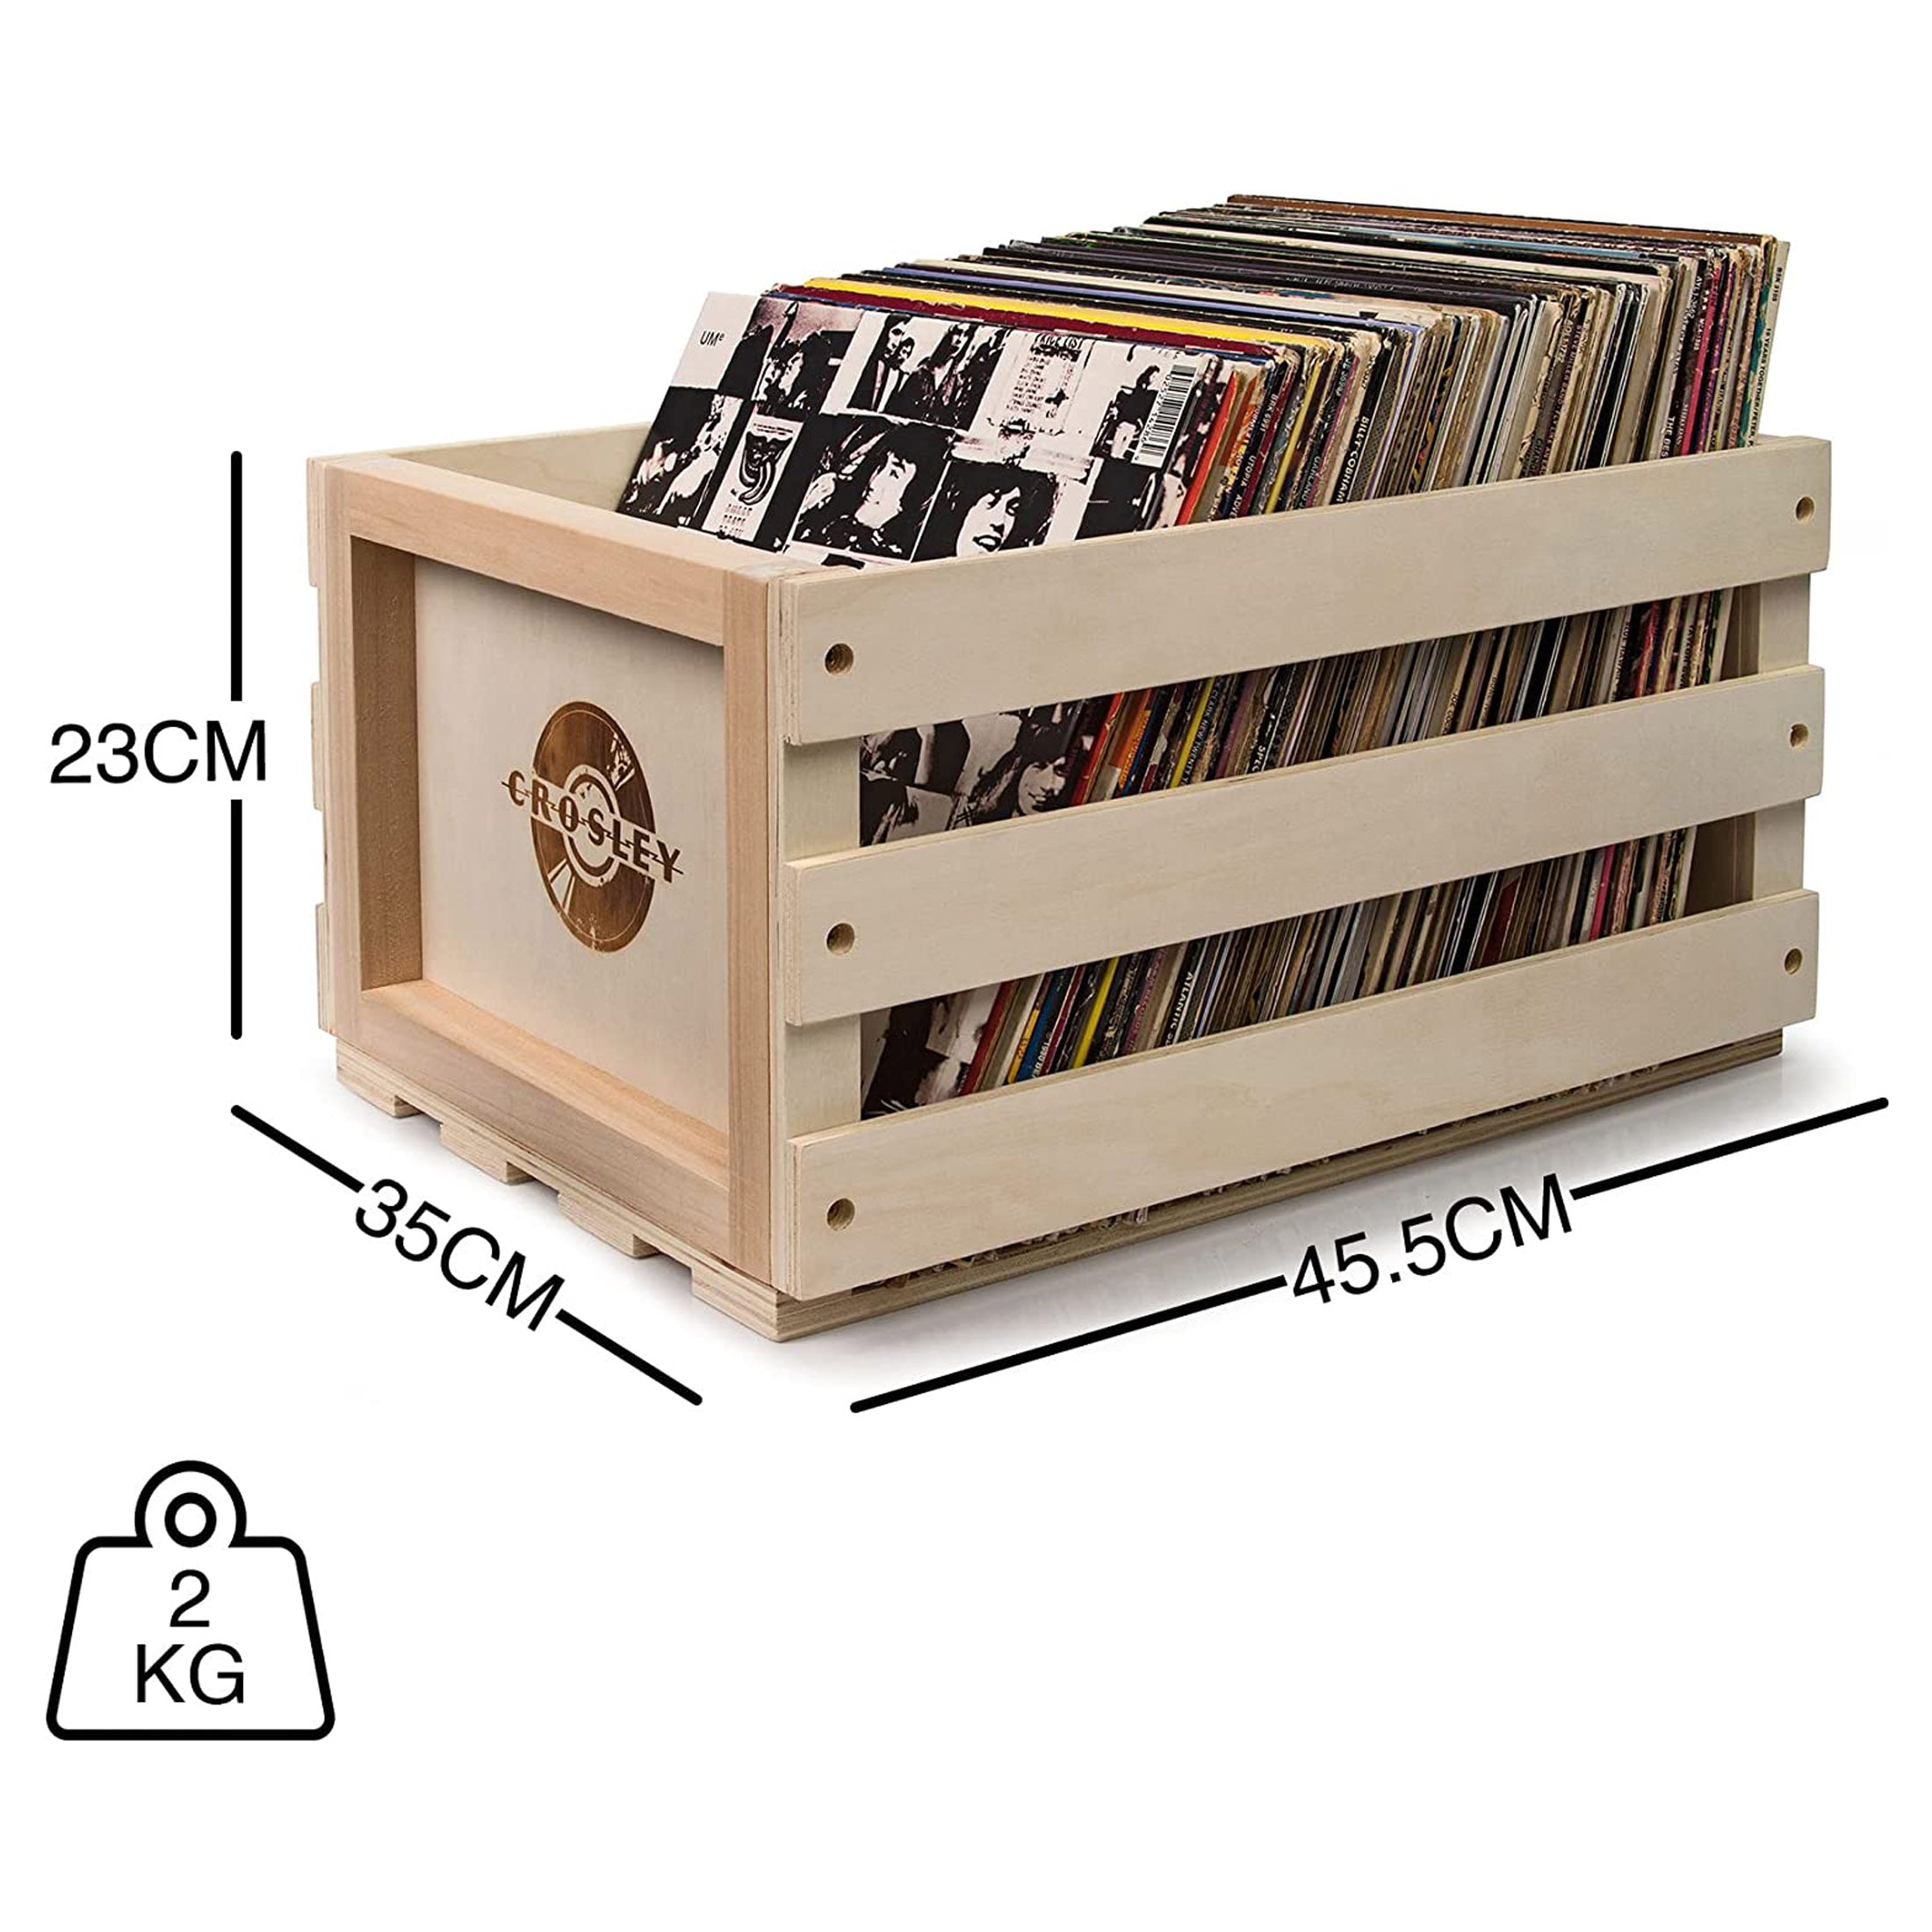 Crosley Vinyl LP Record Storage Crate Natural Wood Holds up to 75 - SILBERSHELL